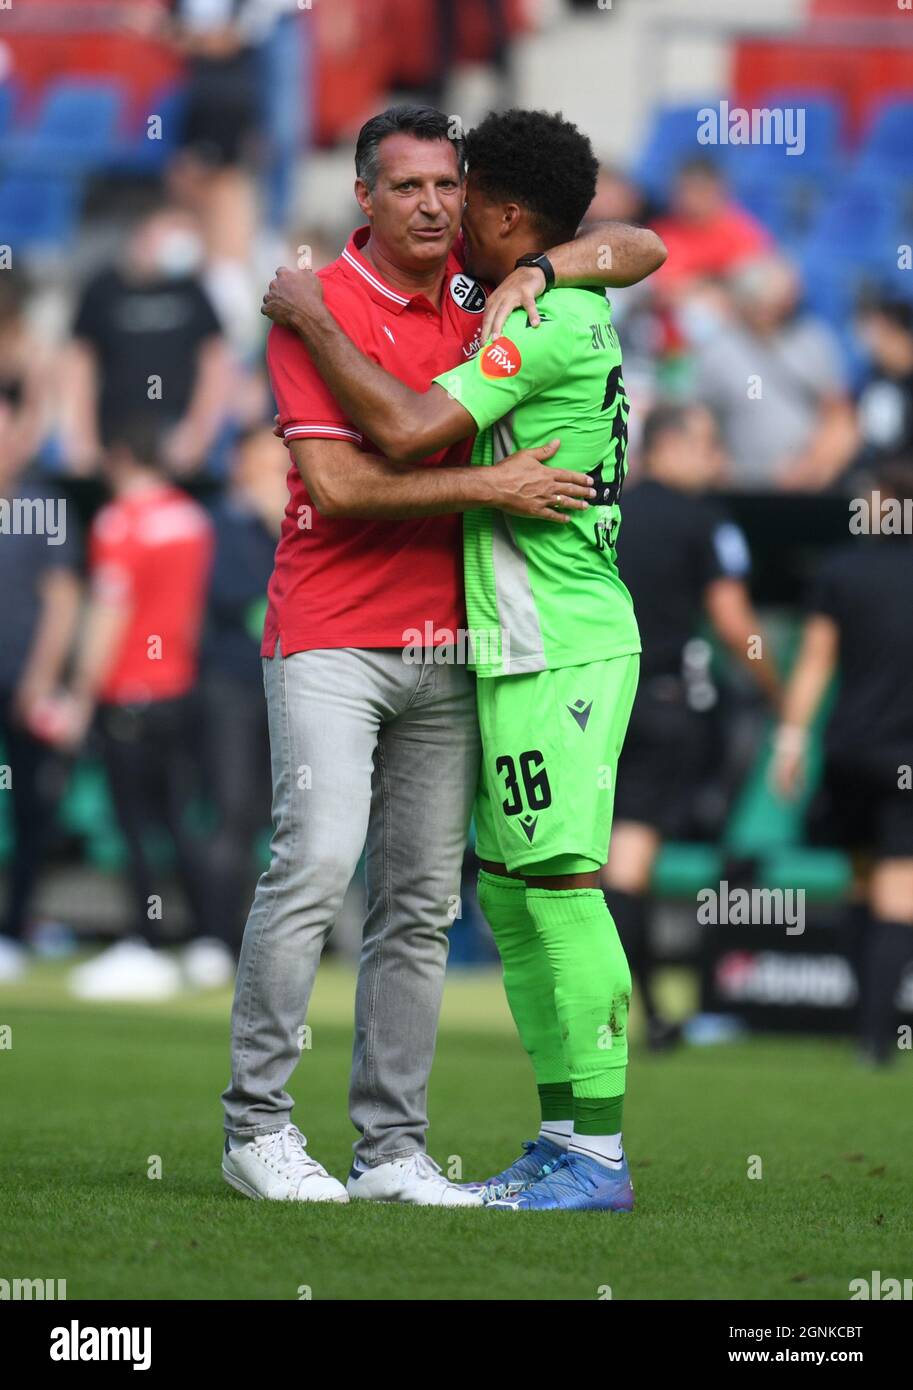 26 September 2021, Lower Saxony, Hanover: Football: 2nd Bundesliga, Matchday 8: Hannover 96 - SV Sandhausen at the HDI Arena. Sandhausen coach Alois Schwartz (l) and Chima Okoroji hug after the match. Photo: Daniel Reinhardt/dpa - IMPORTANT NOTE: In accordance with the regulations of the DFL Deutsche Fußball Liga and/or the DFB Deutscher Fußball-Bund, it is prohibited to use or have used photographs taken in the stadium and/or of the match in the form of sequence pictures and/or video-like photo series. Stock Photo